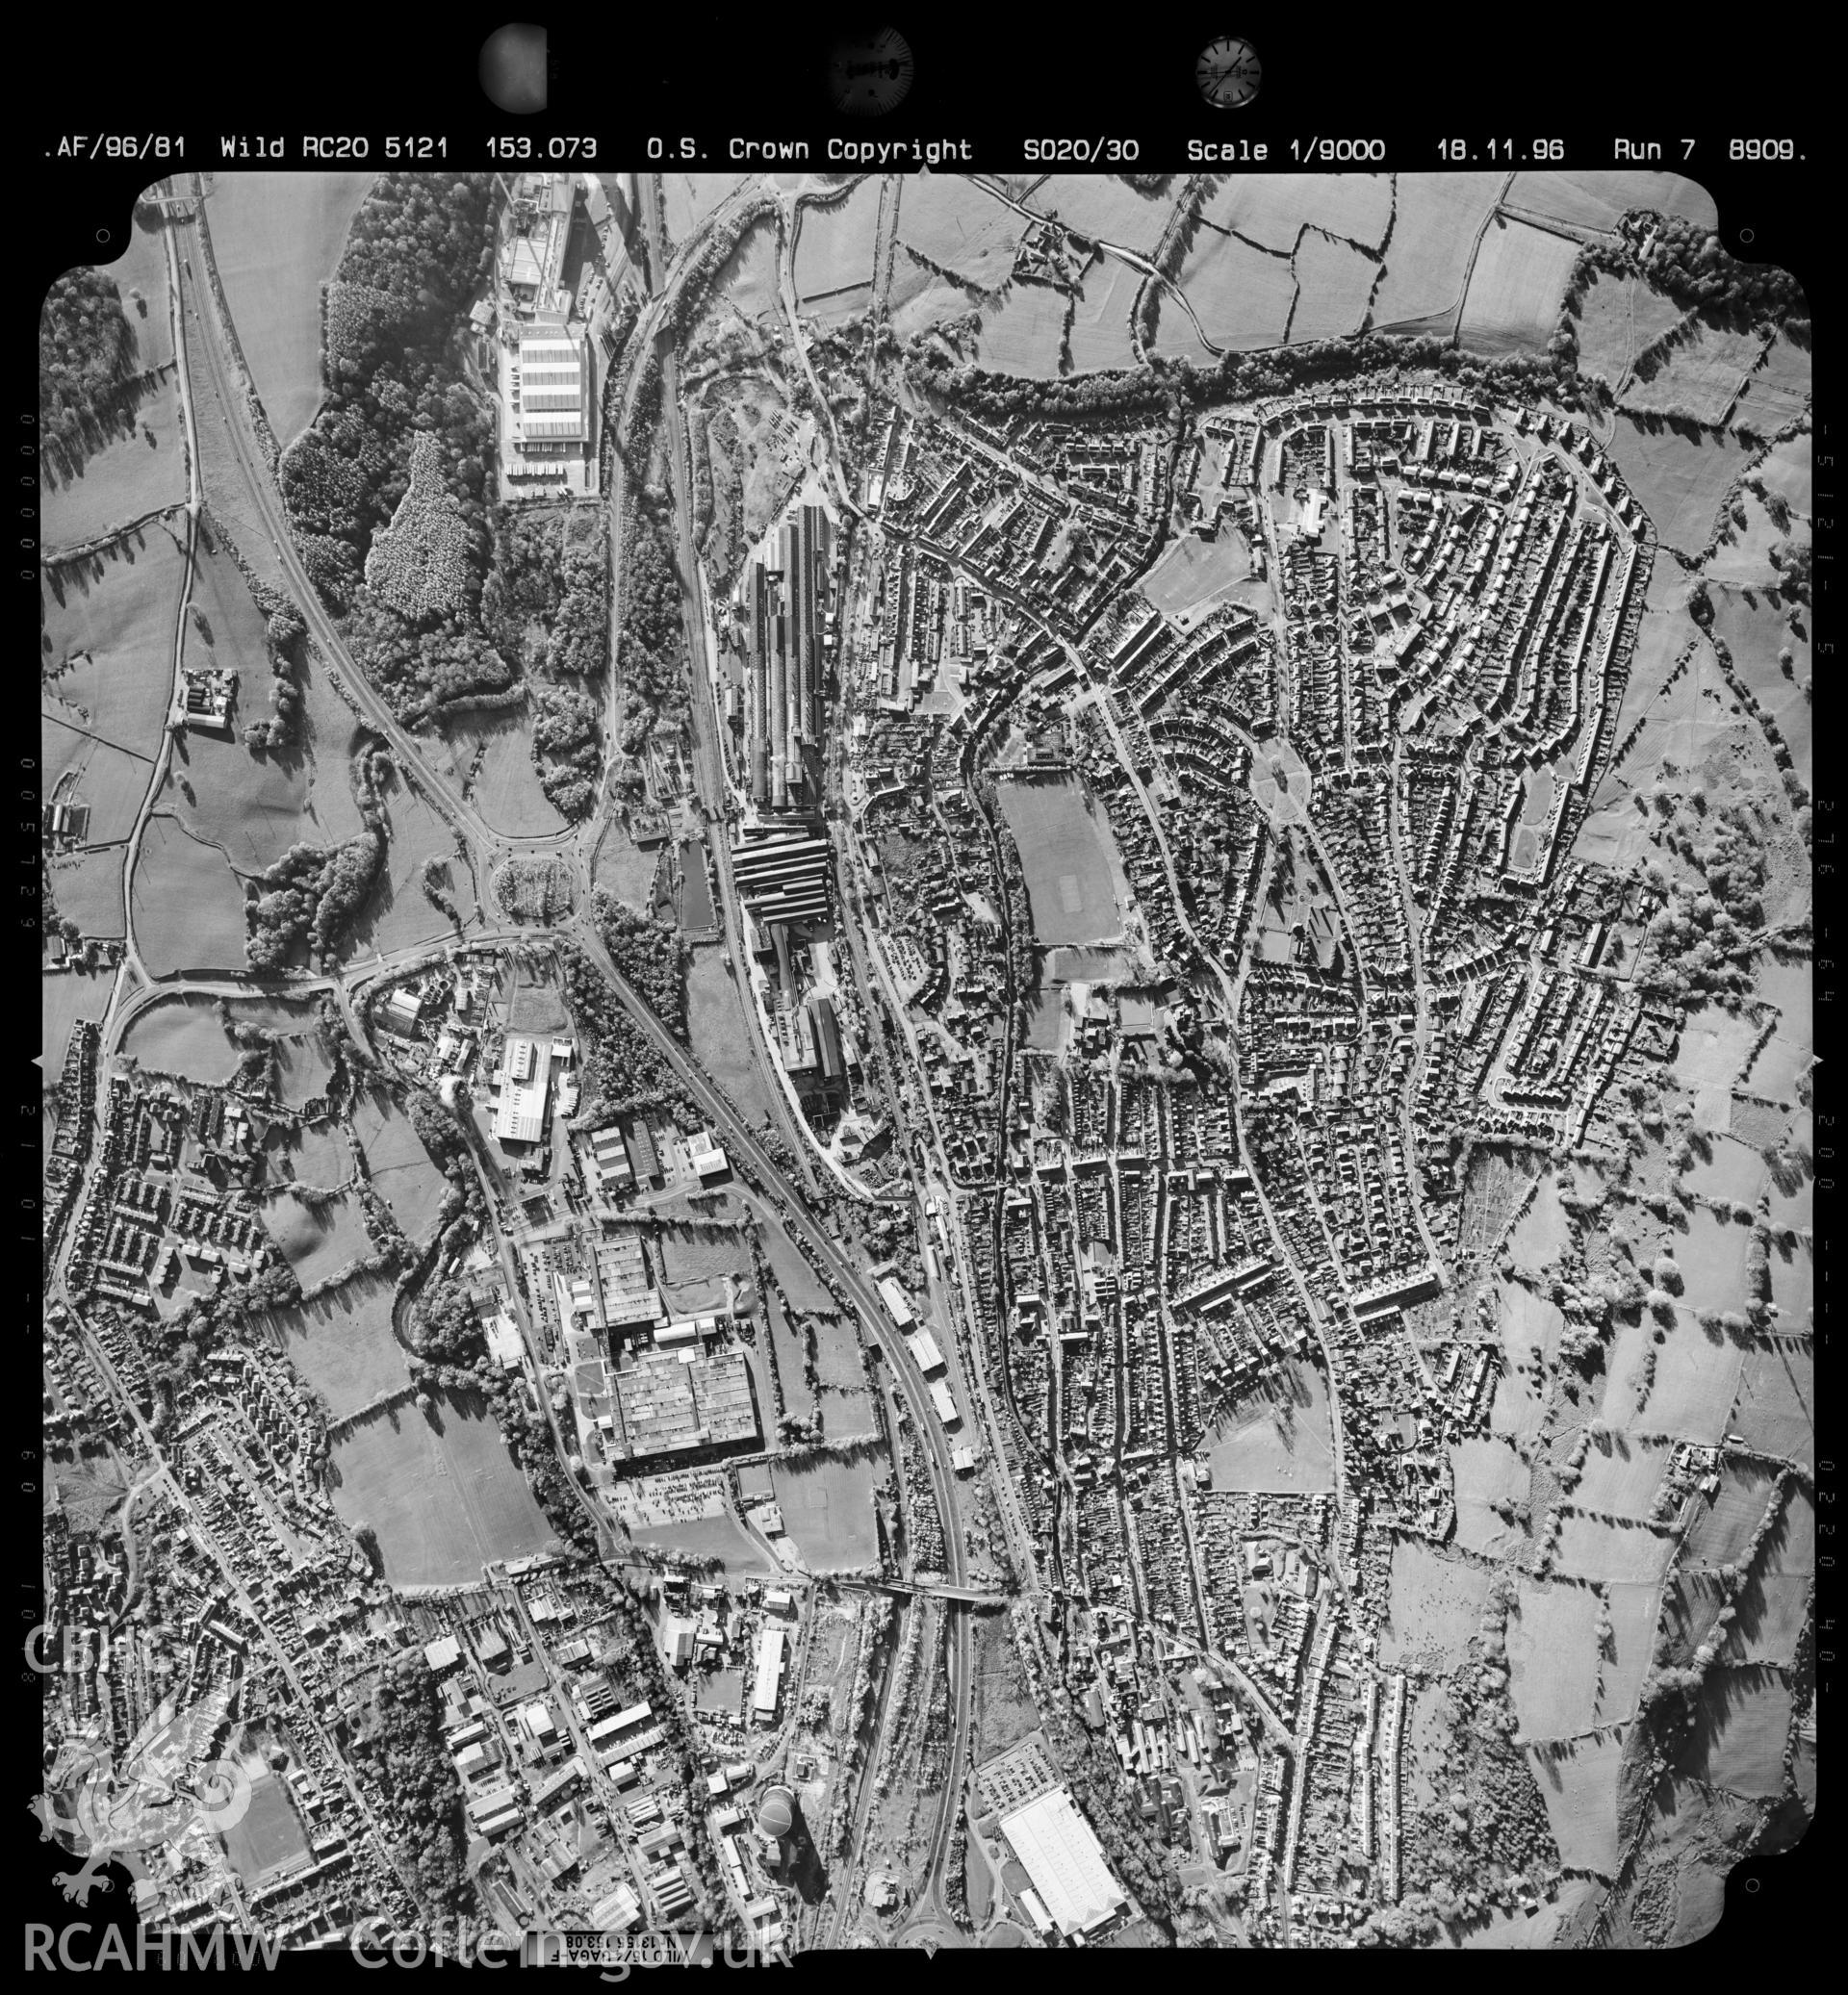 Digitized copy of an aerial photograph showing the Pontypool area, taken by Ordnance Survey, 1996.